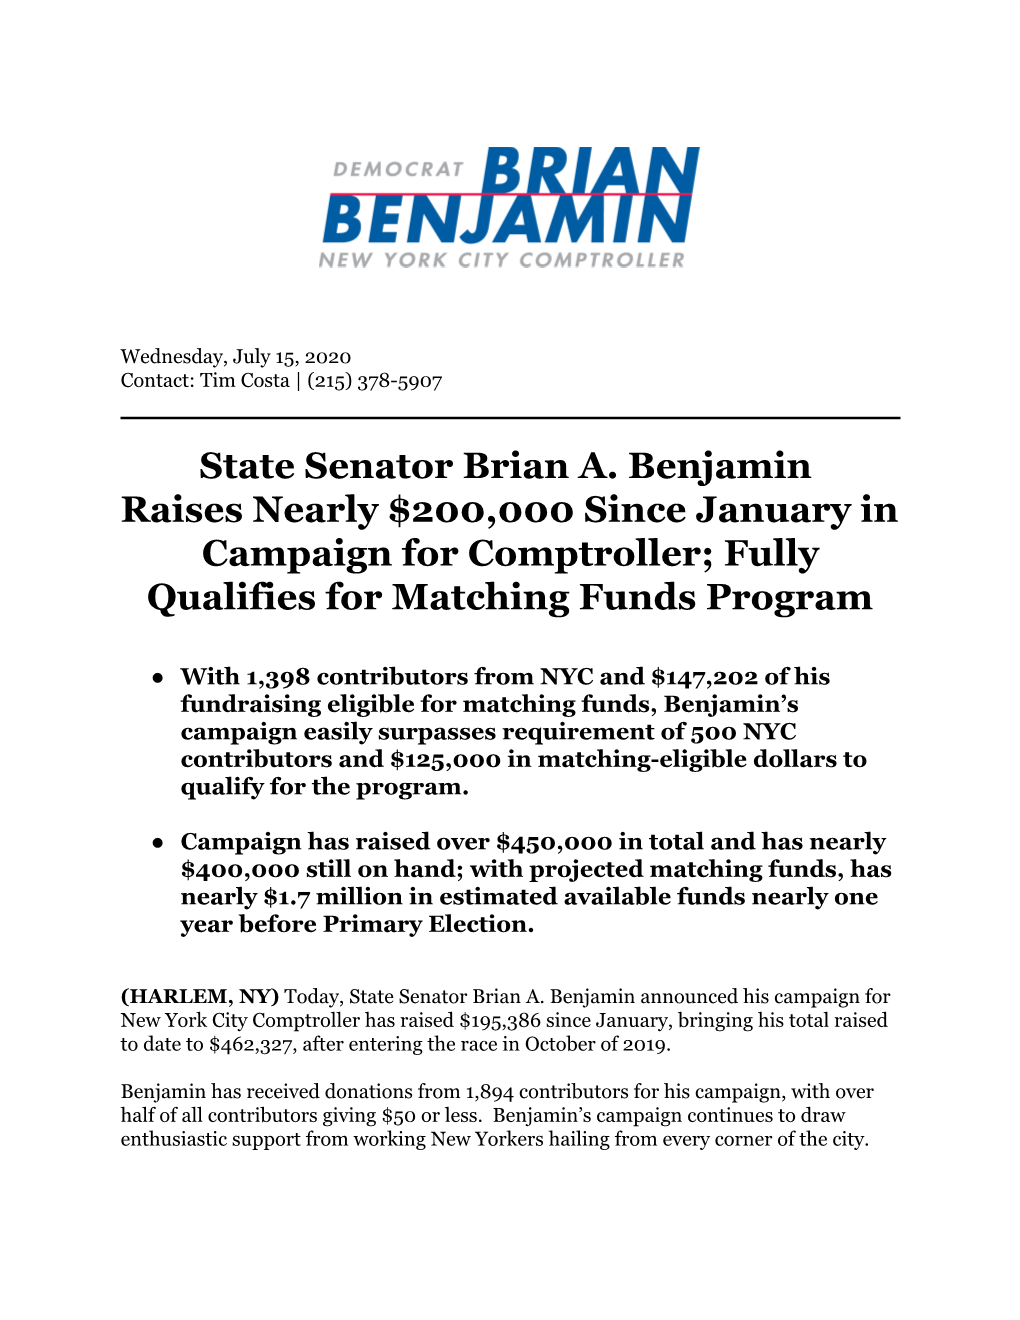 State Senator Brian A. Benjamin Raises Nearly $200,000 Since January in Campaign for Comptroller; Fully Qualifies for Matching Funds Program